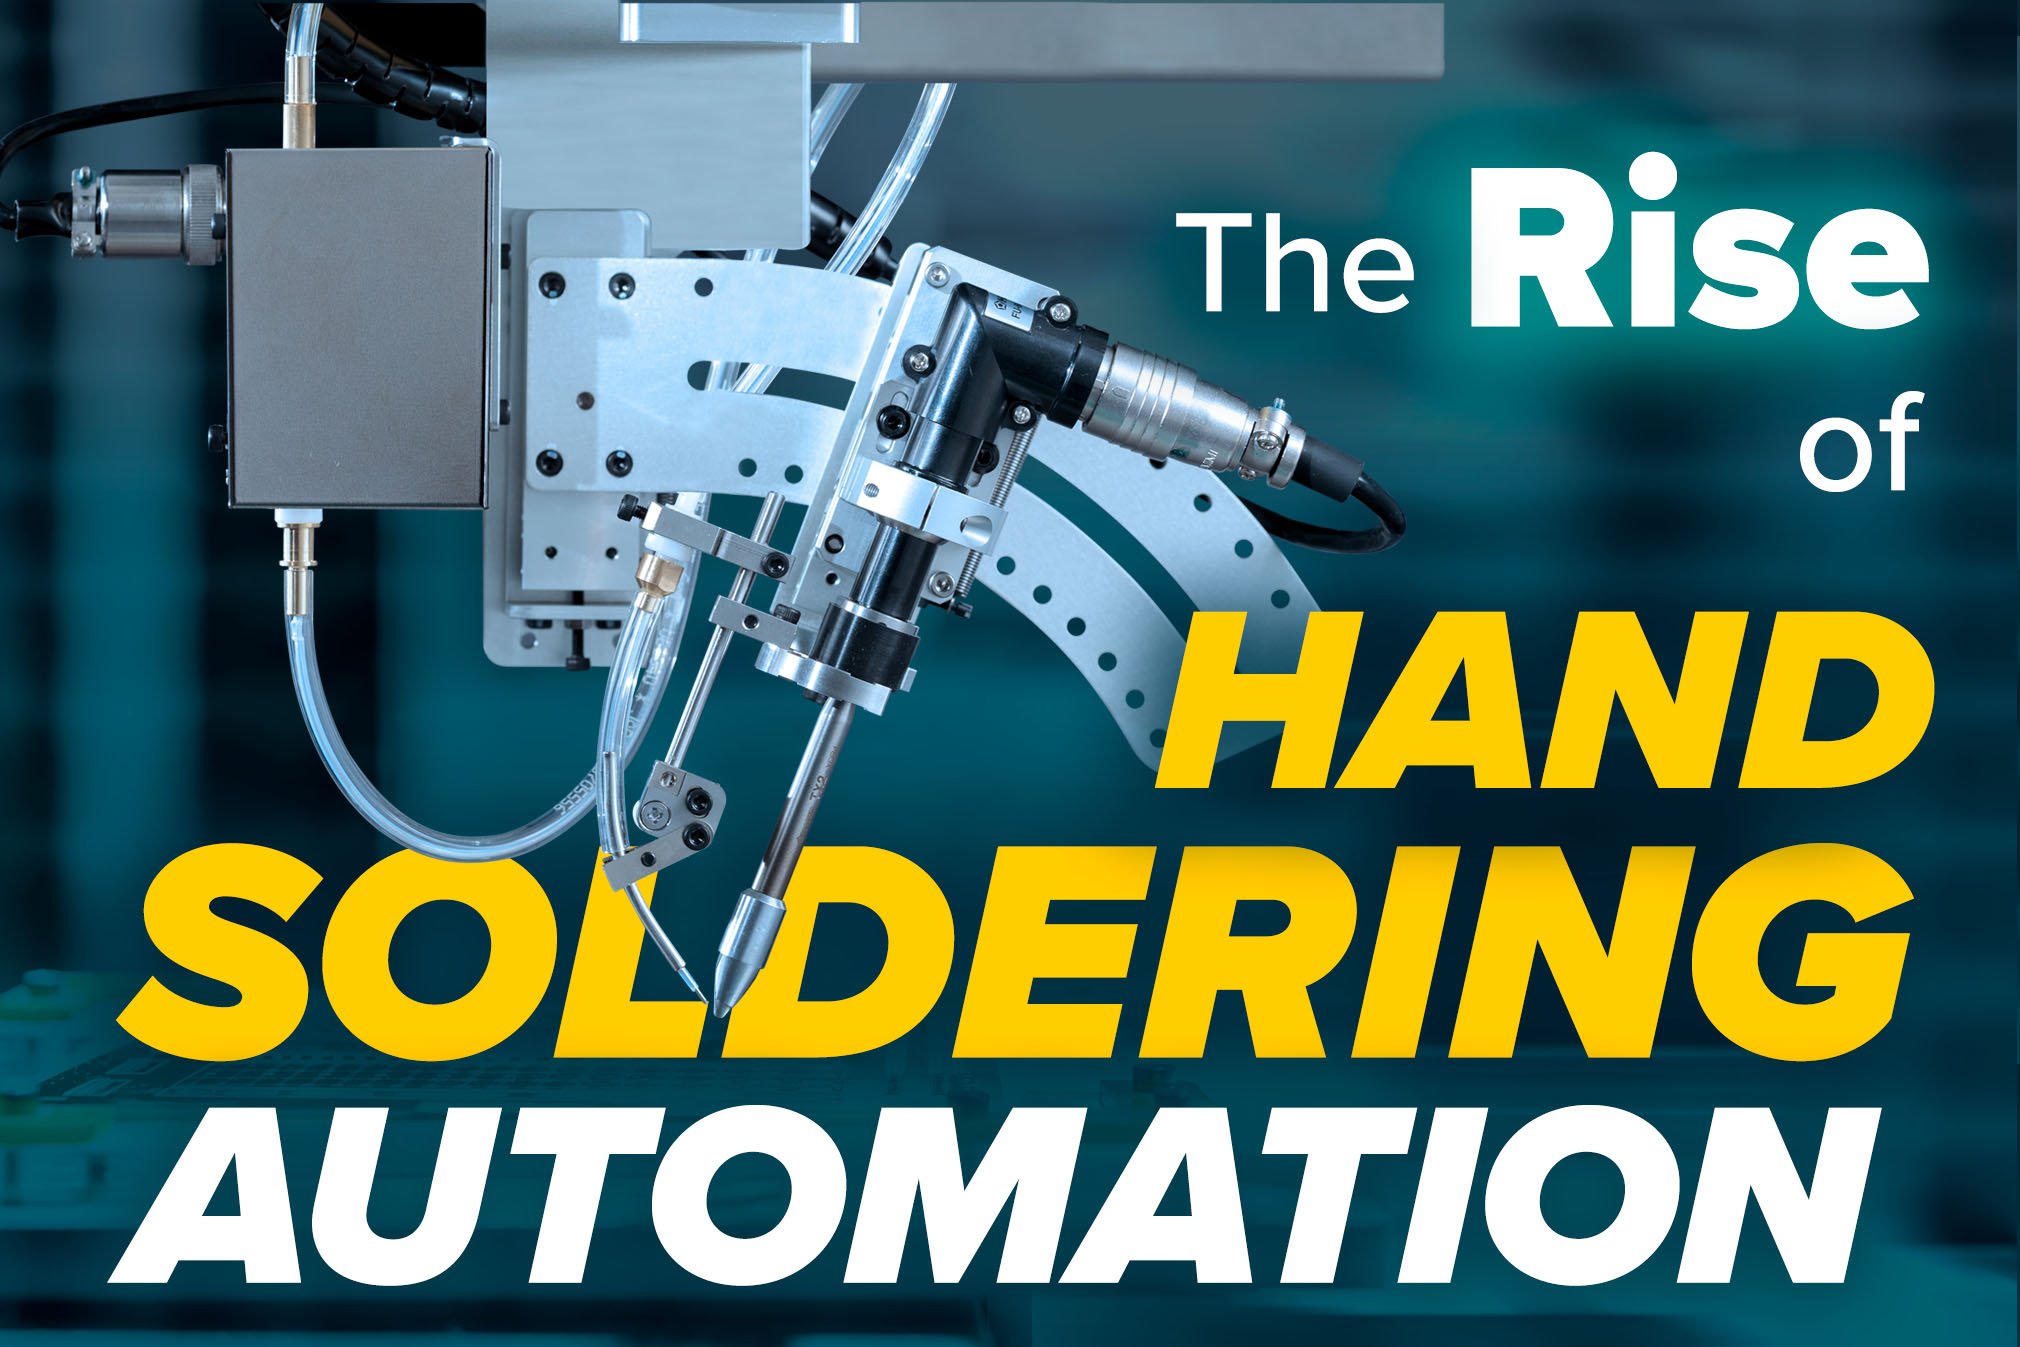 The Rise of Hand Soldering Automation